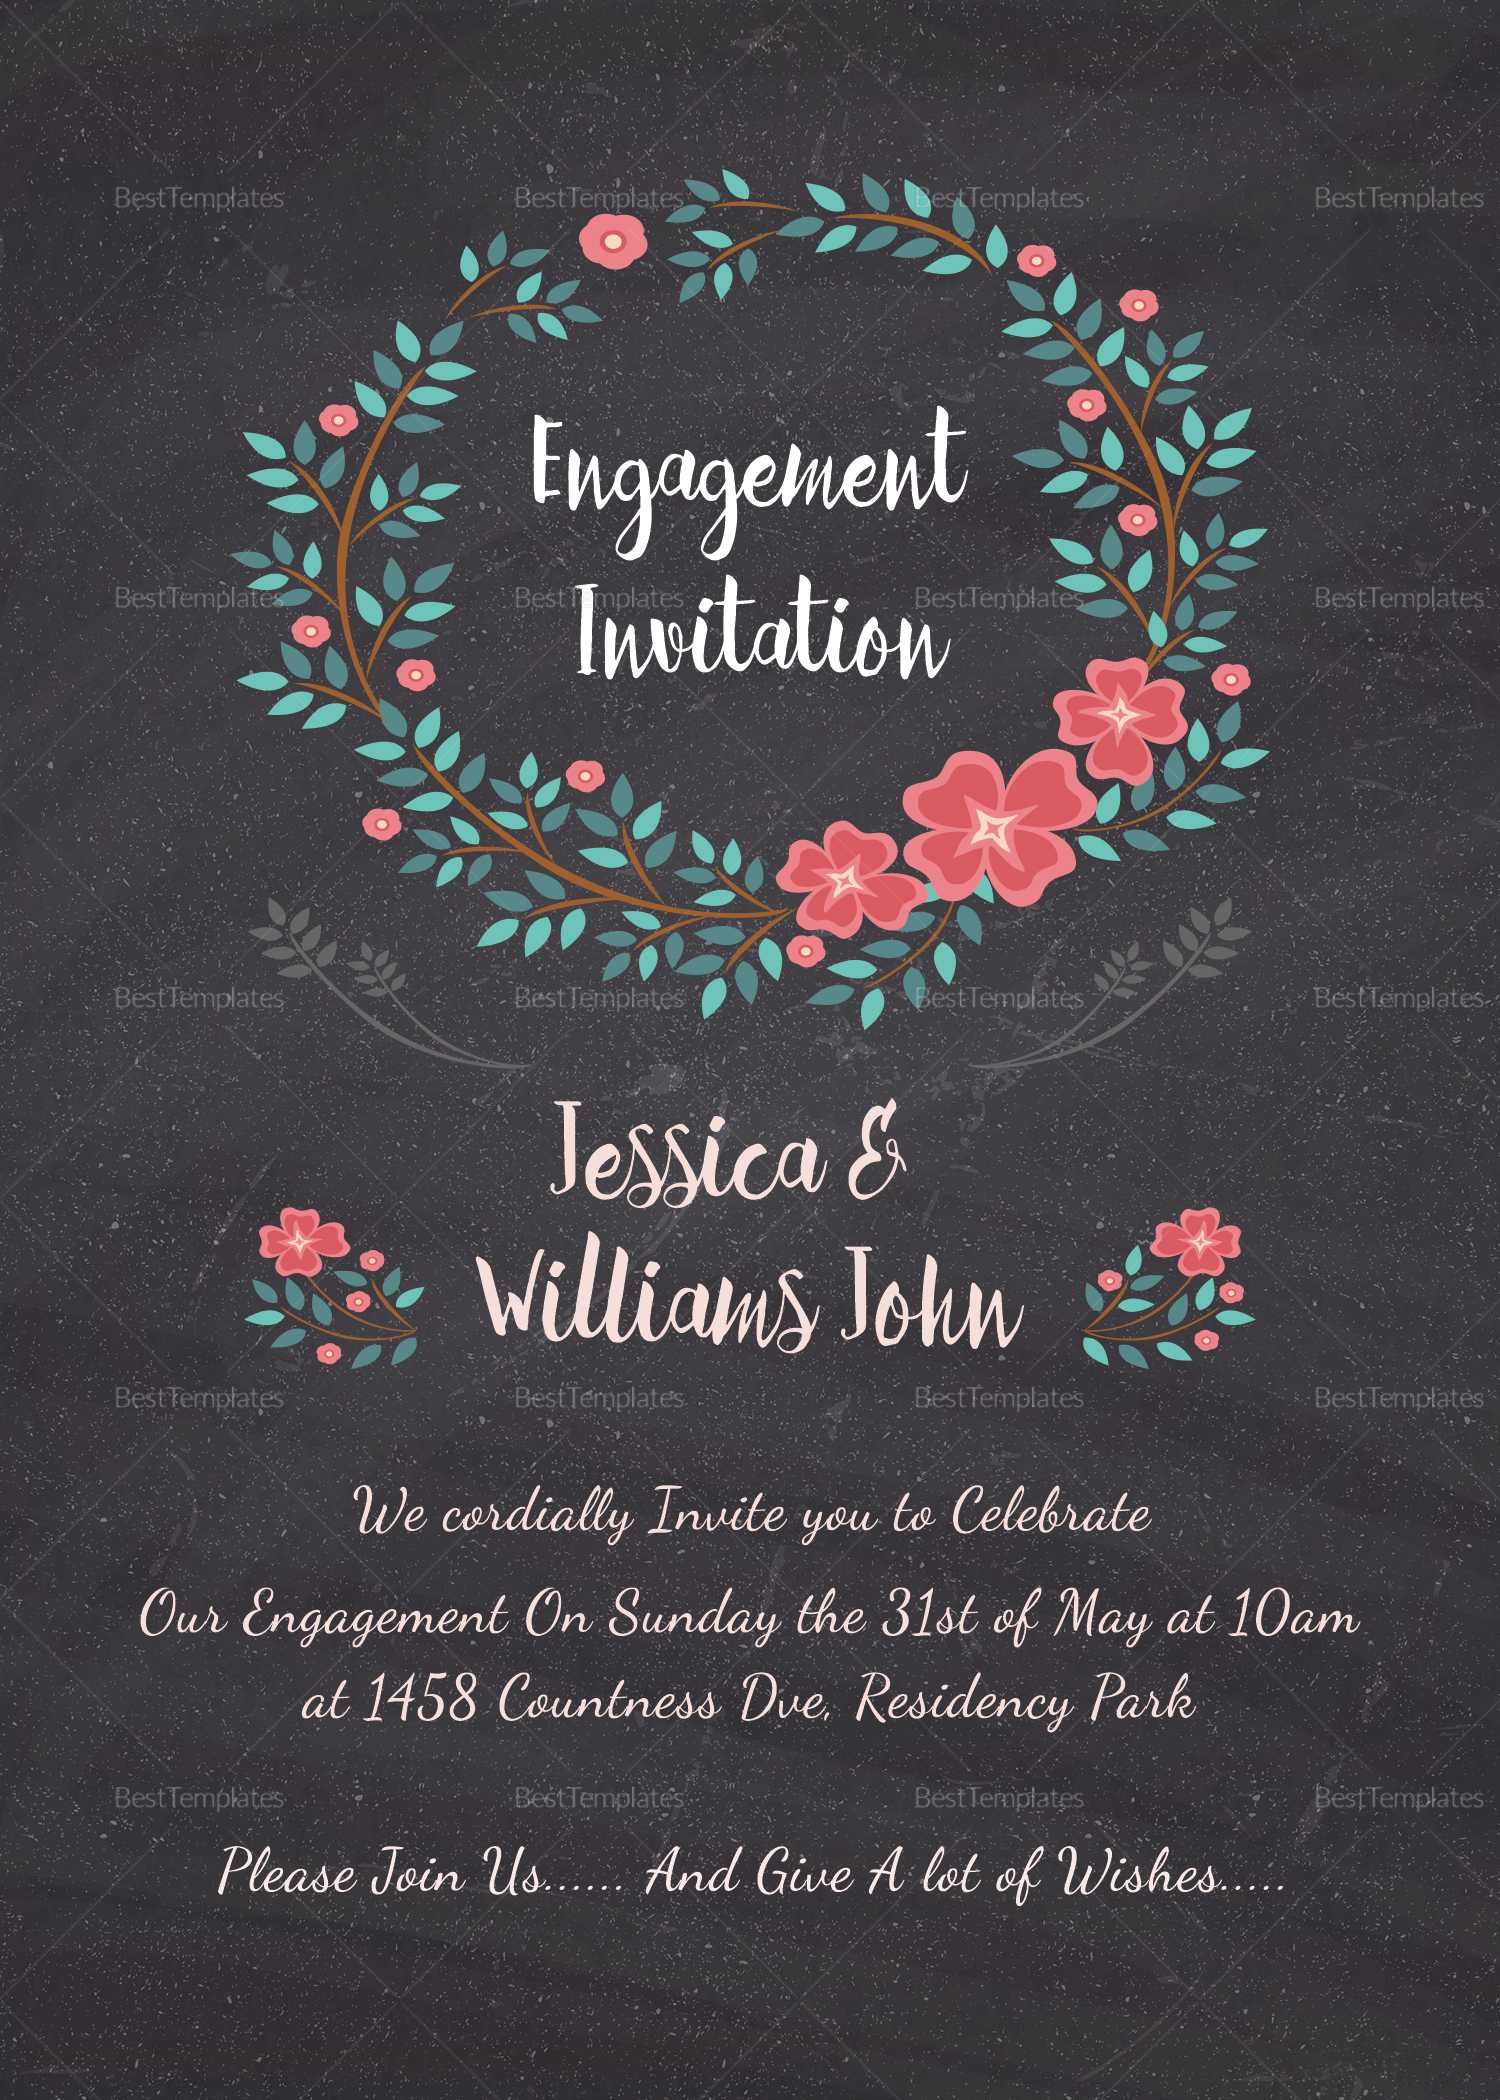 Engagement Invitation Card Template For Engagement Invitation Card Template